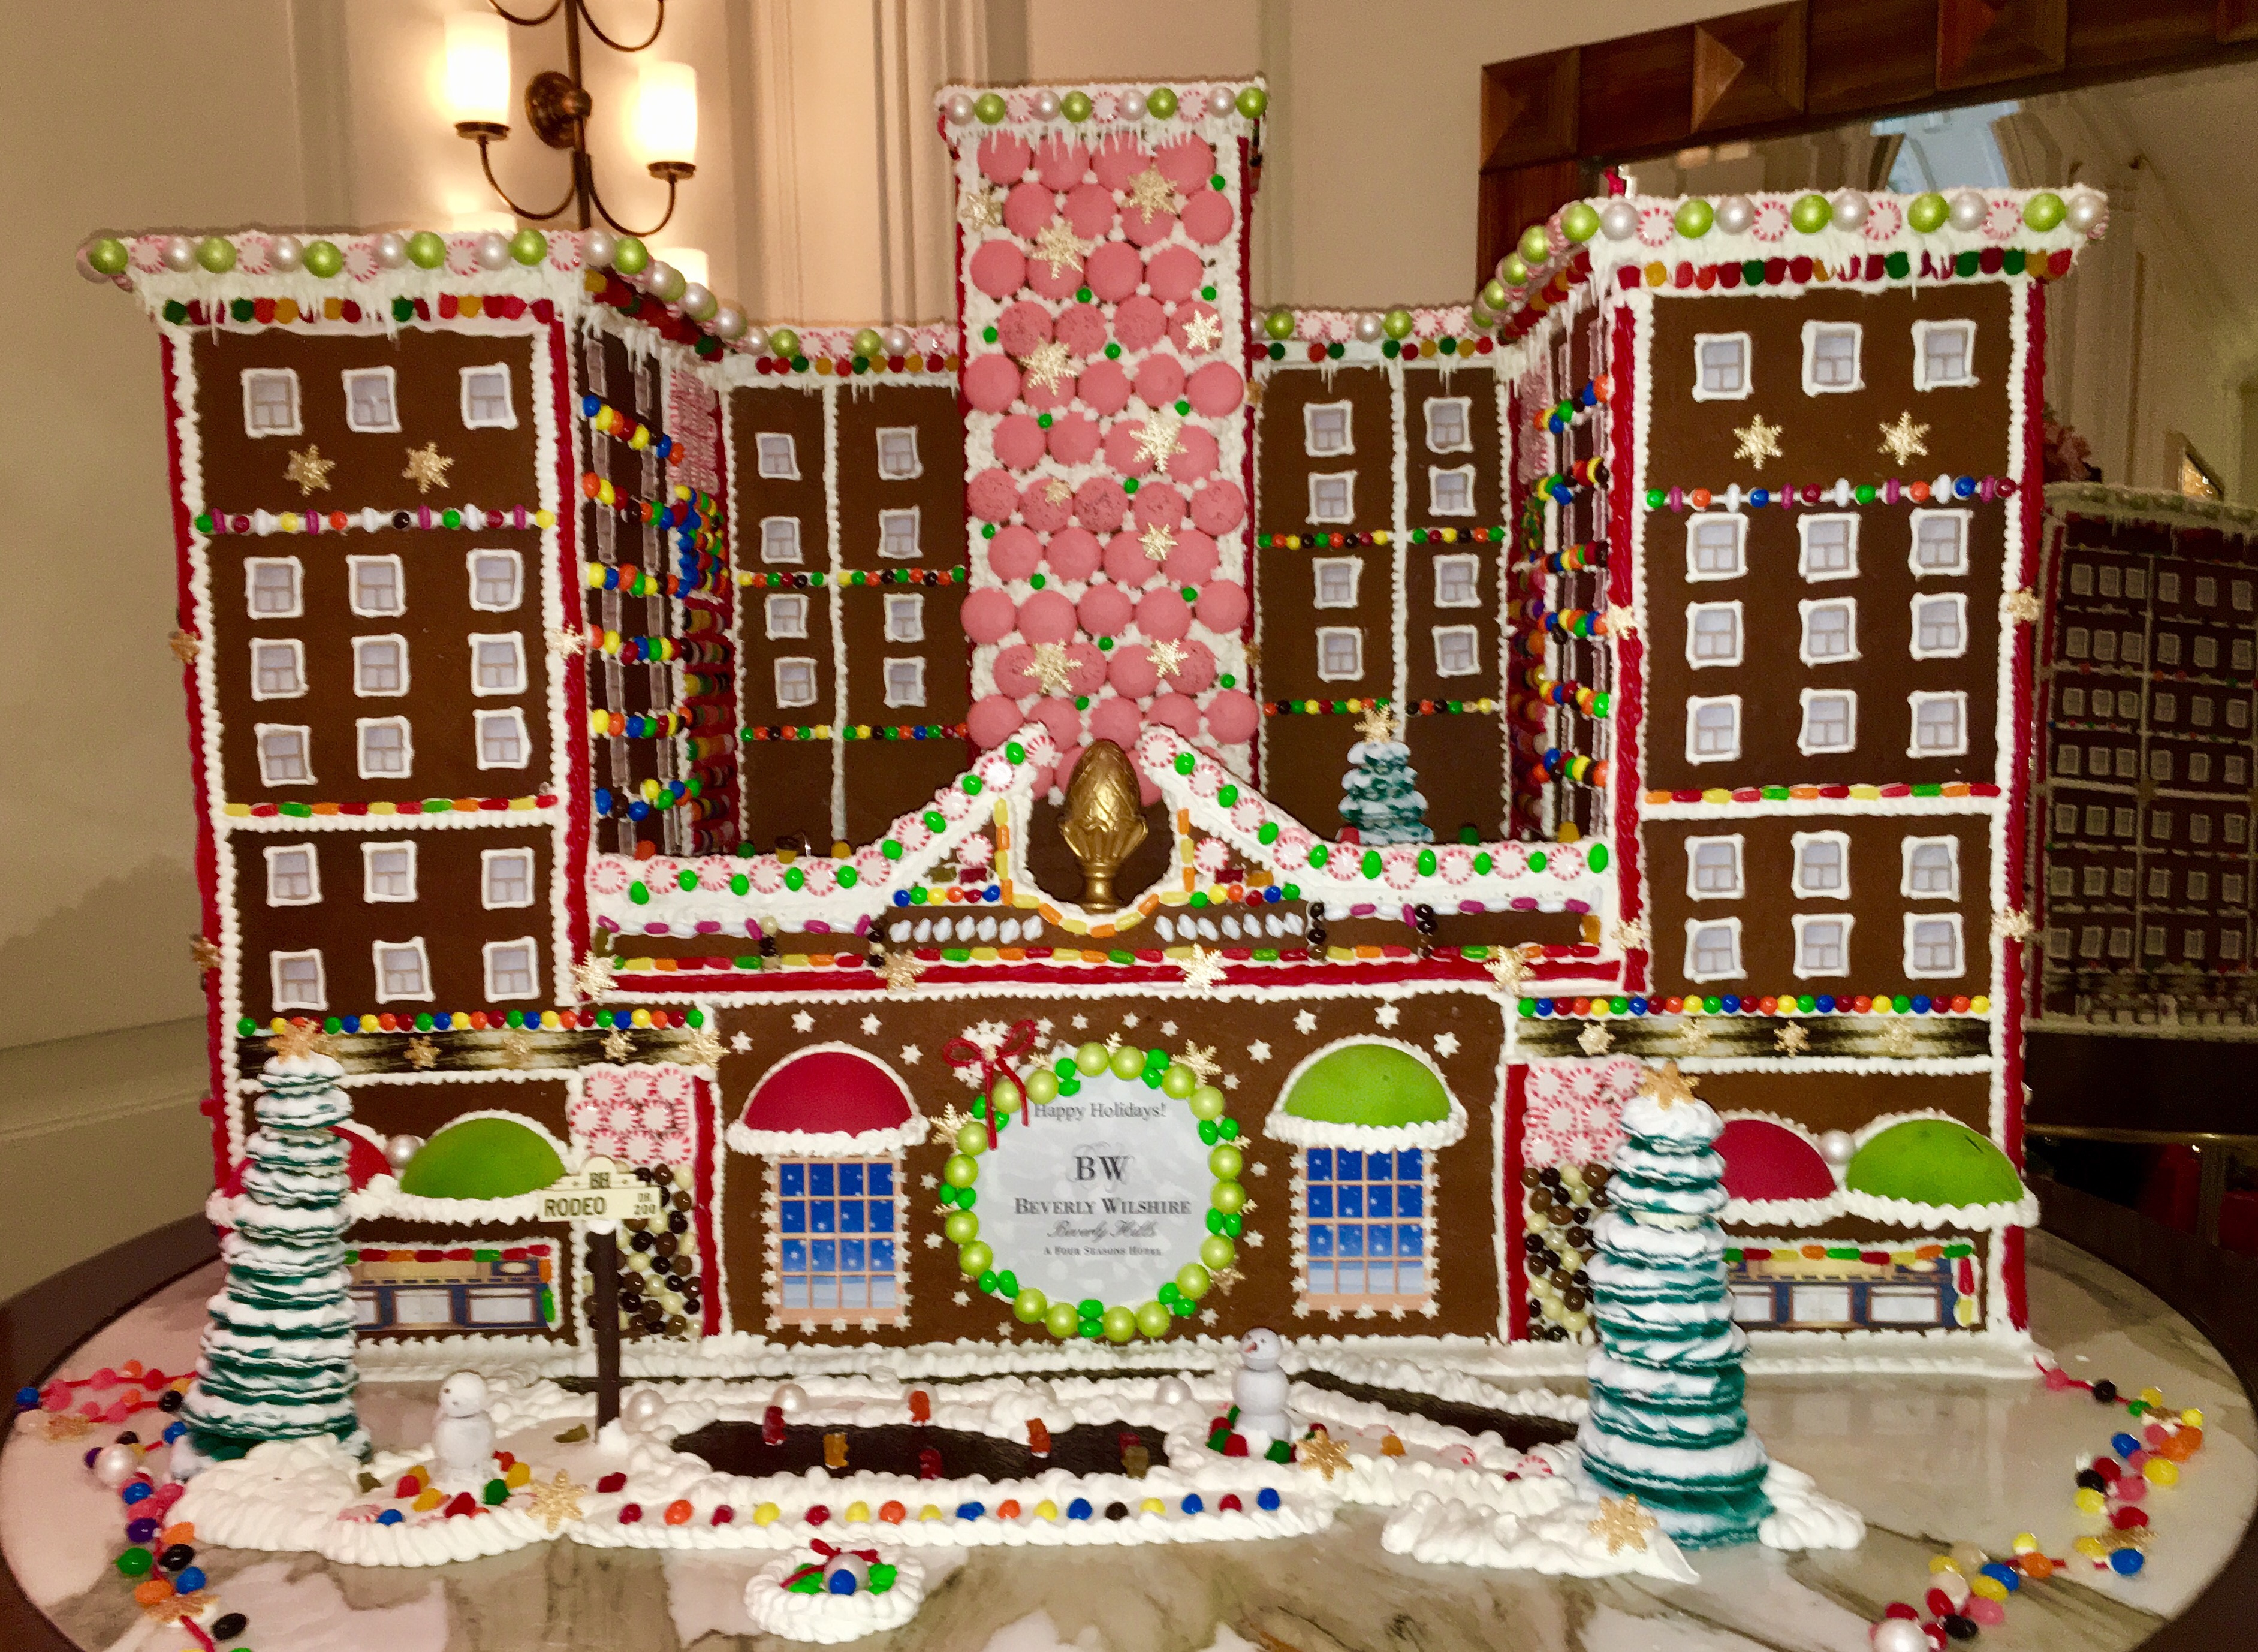 The wonderful gingerbread replica of the Beverly Wilshire Hotel.